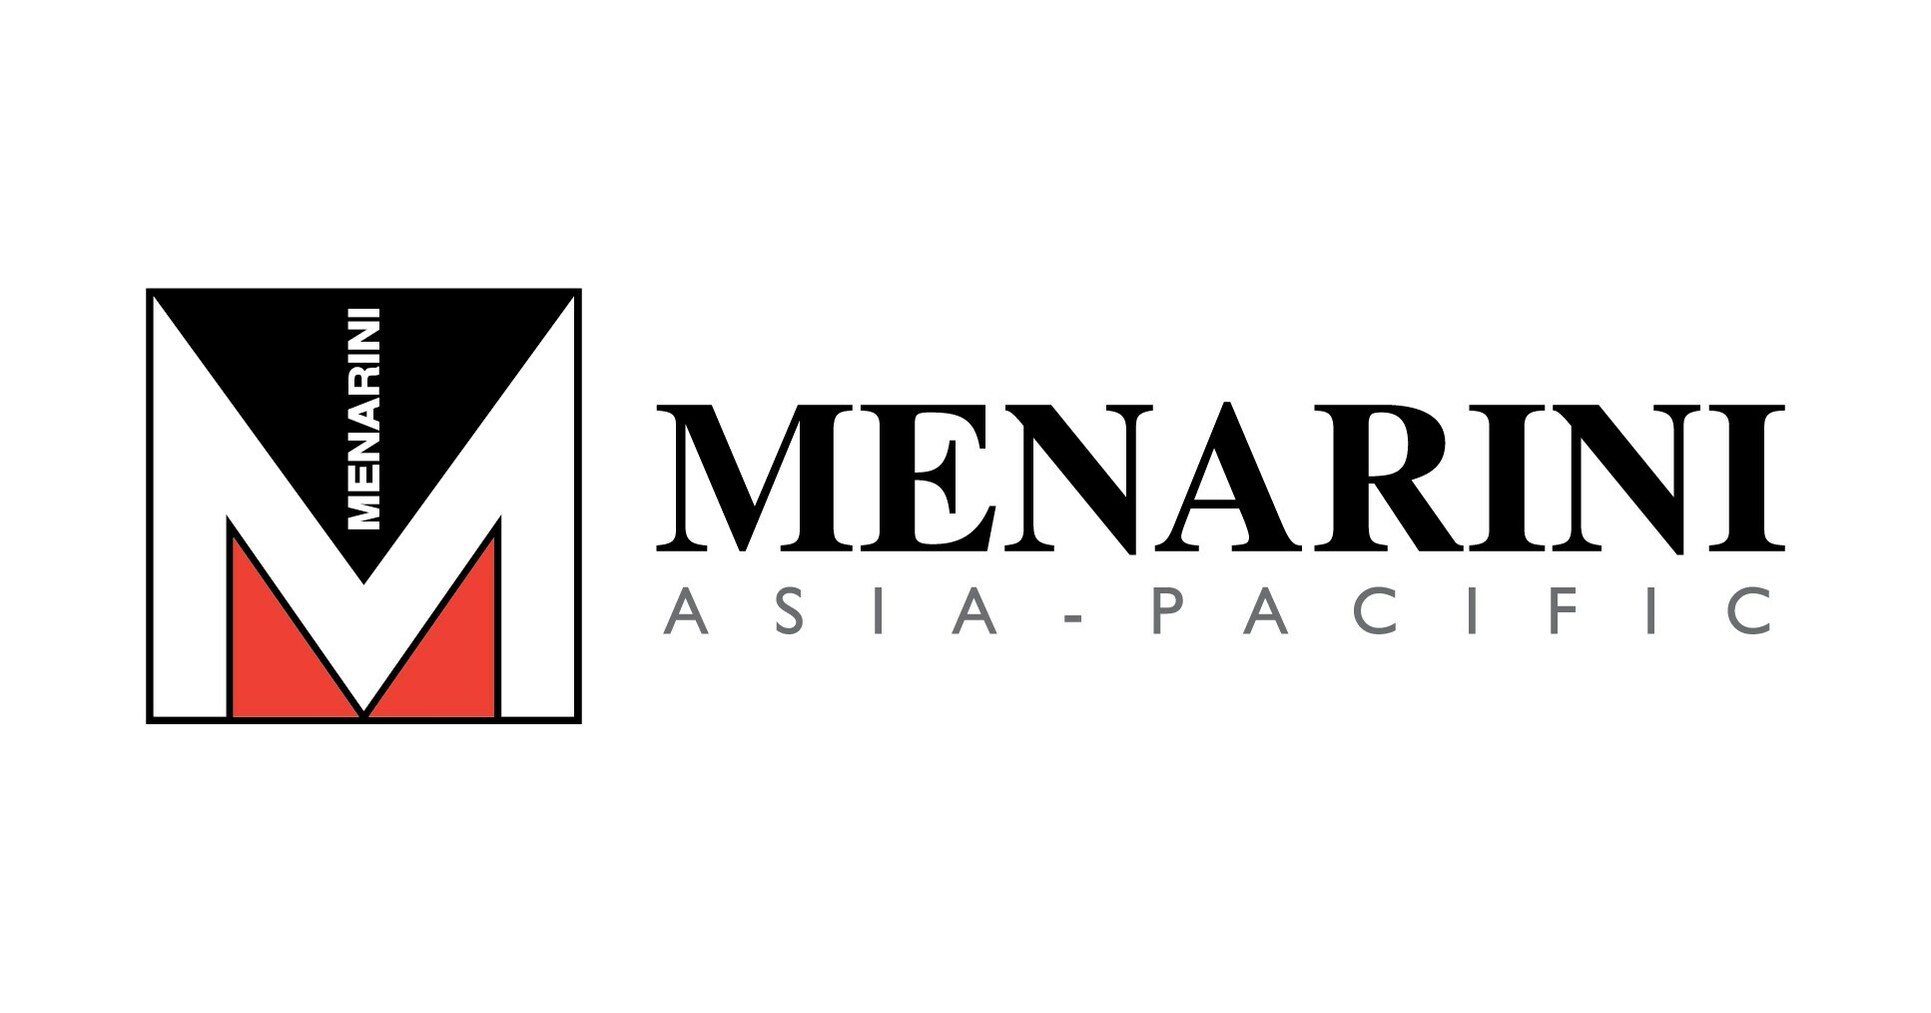 Menarini AsiaPacific Enters into an Exclusive Licensing Agreement with